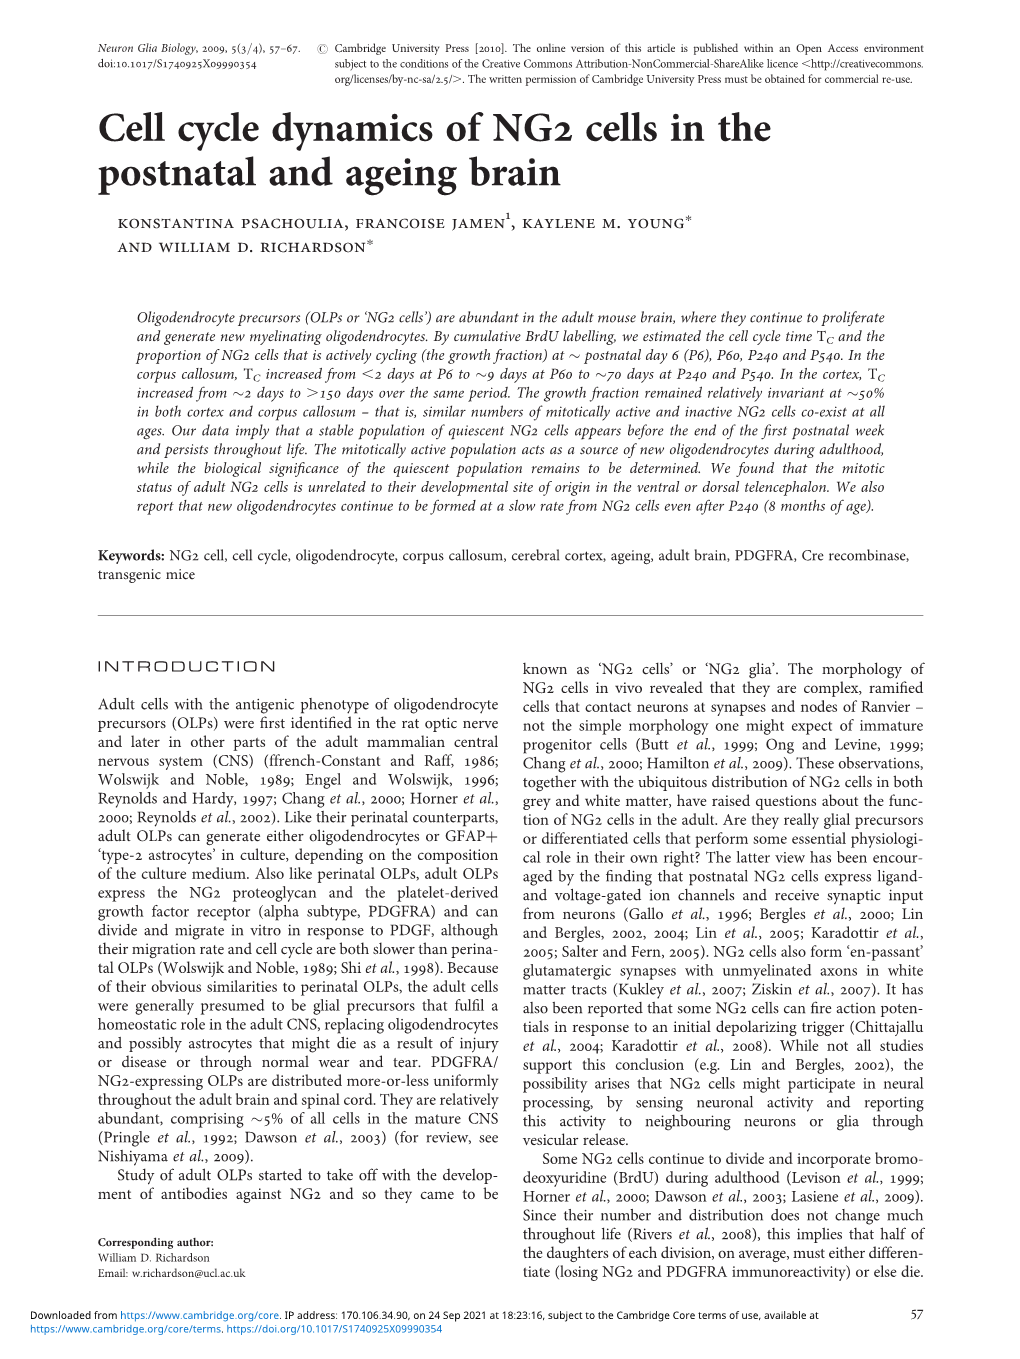 Cell Cycle Dynamics of NG2 Cells in the Postnatal and Ageing Brain 1 Konstantina Psachoulia, Francoise Jamen , Kaylene M